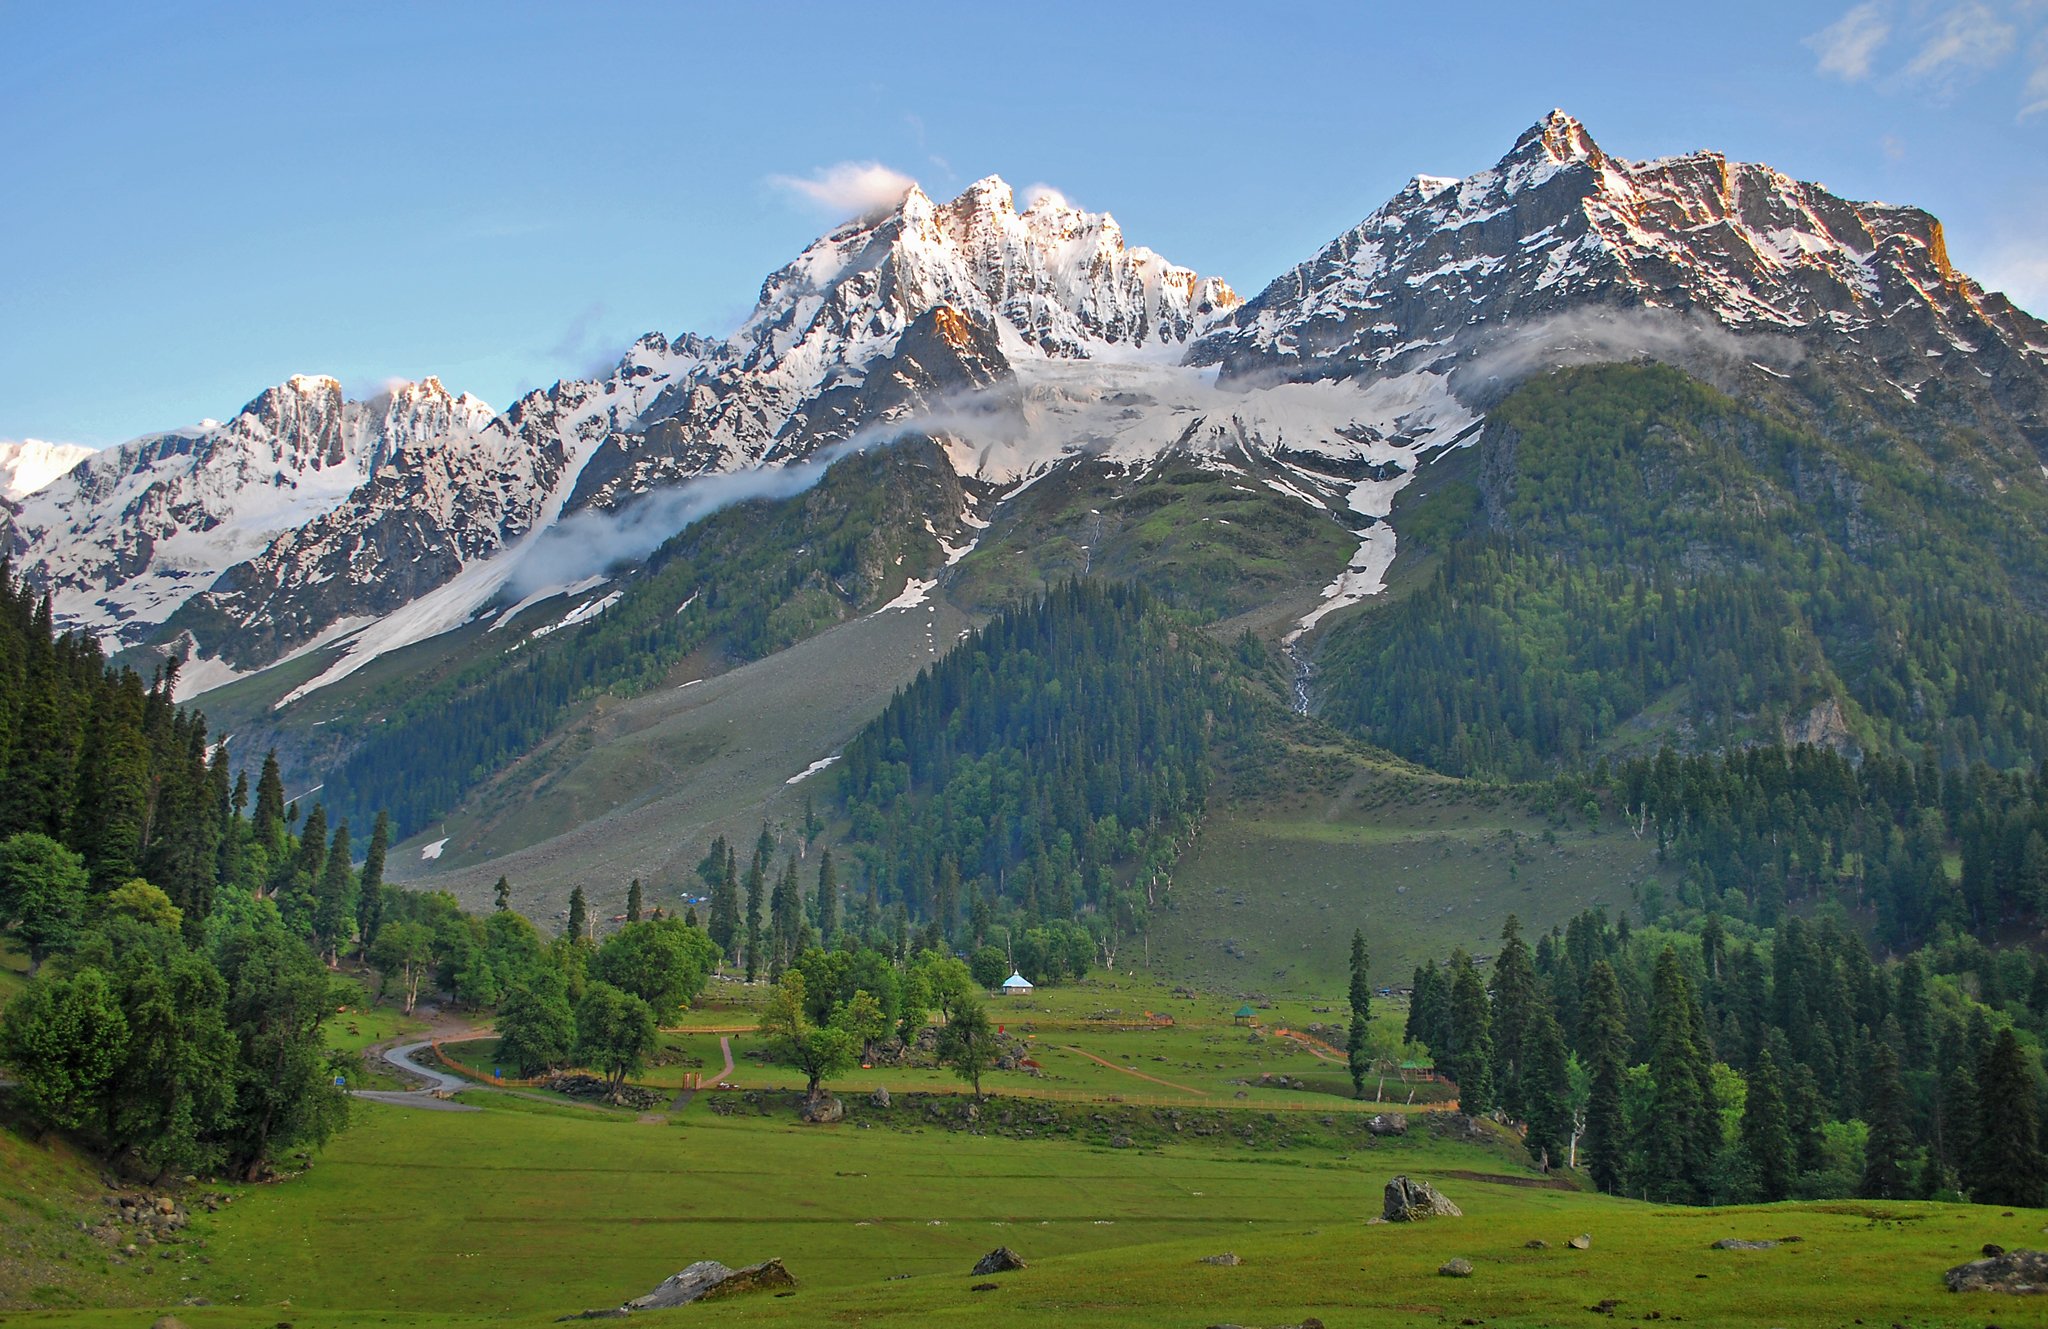 <p>Sonamarg, which means &#8220;golden meadow&#8221;, has been carefully preserved in Kashmir, but it may not be for much longer (Image: Rajesh/Himalayan Trails)</p>